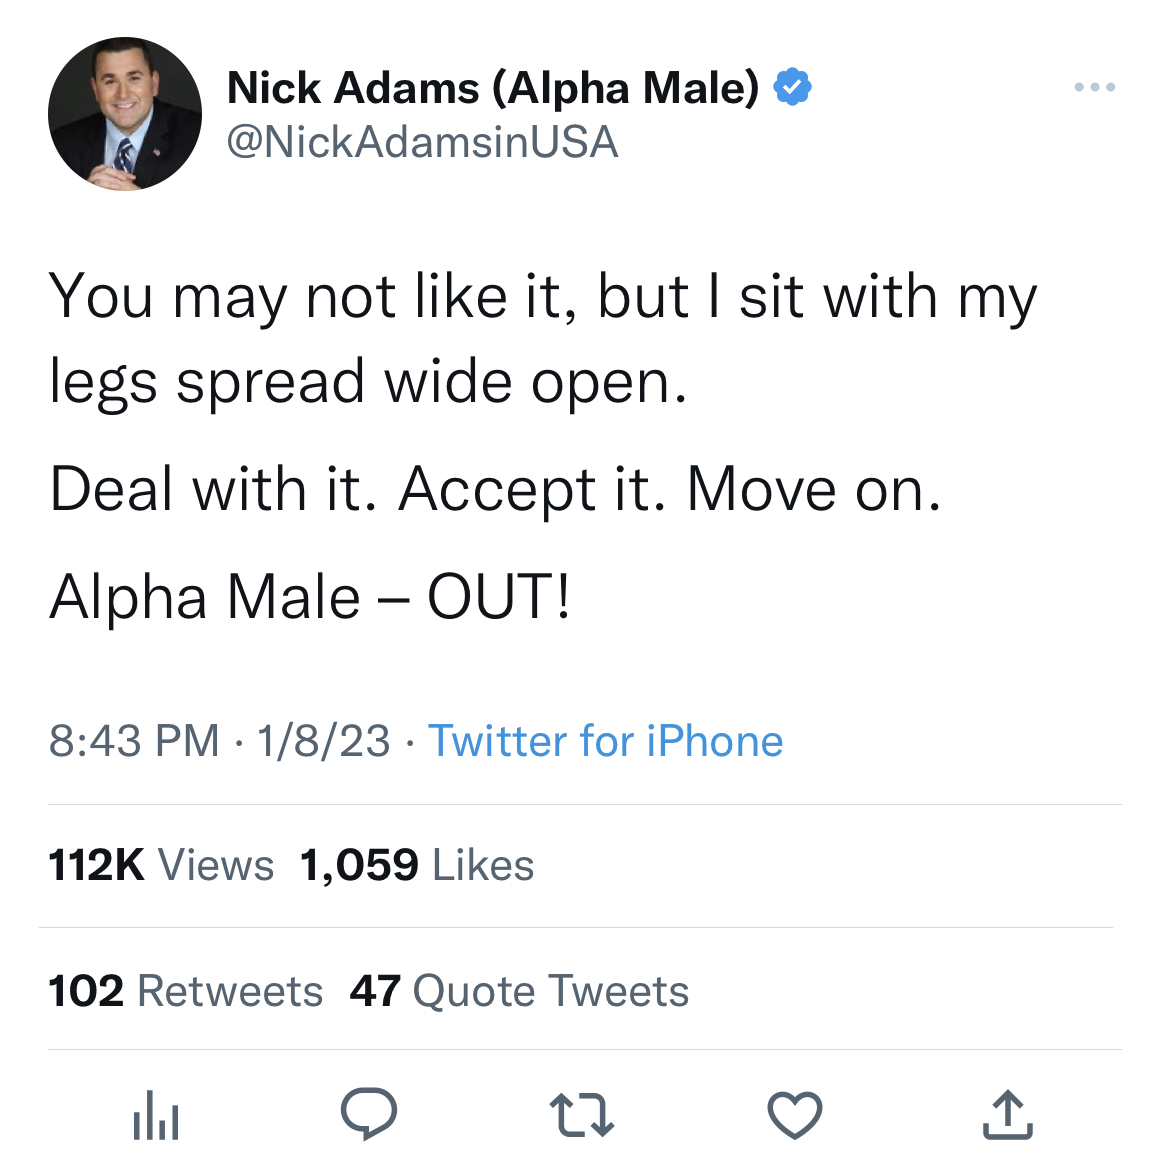 nick adams unhinged tweets - pizza hut twitter fails - Nick Adams Alpha Male Usa You may not it, but I sit with my legs spread wide open. Deal with it. Accept it. Move on. Alpha Male Out! 1823 Twitter for iPhone Views 1,059 al 102 47 Quote Tweets 27